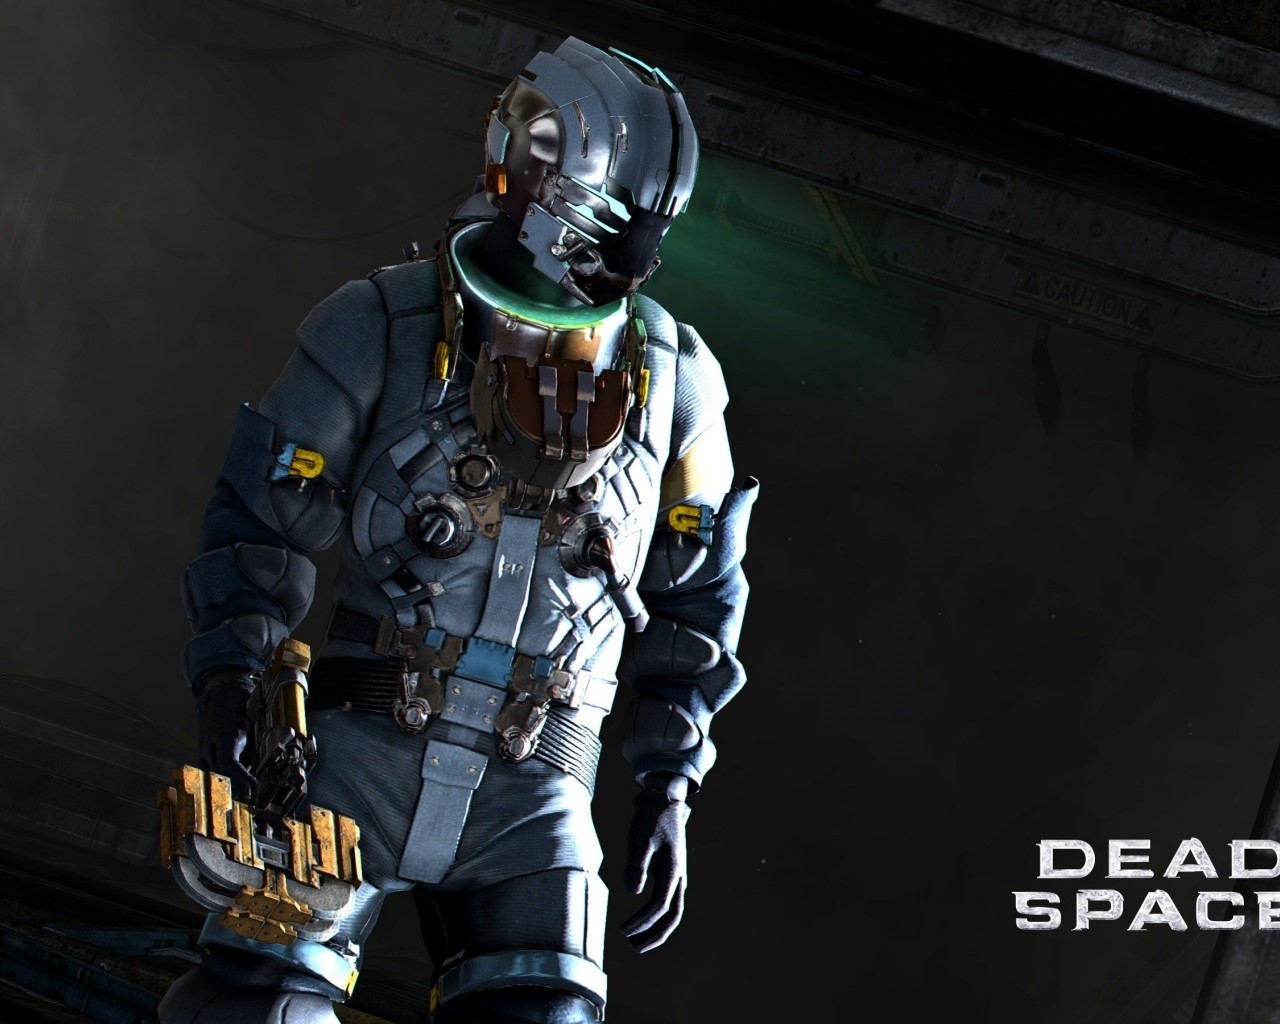 Dead Space 3 Costume for 1280 x 1024 resolution